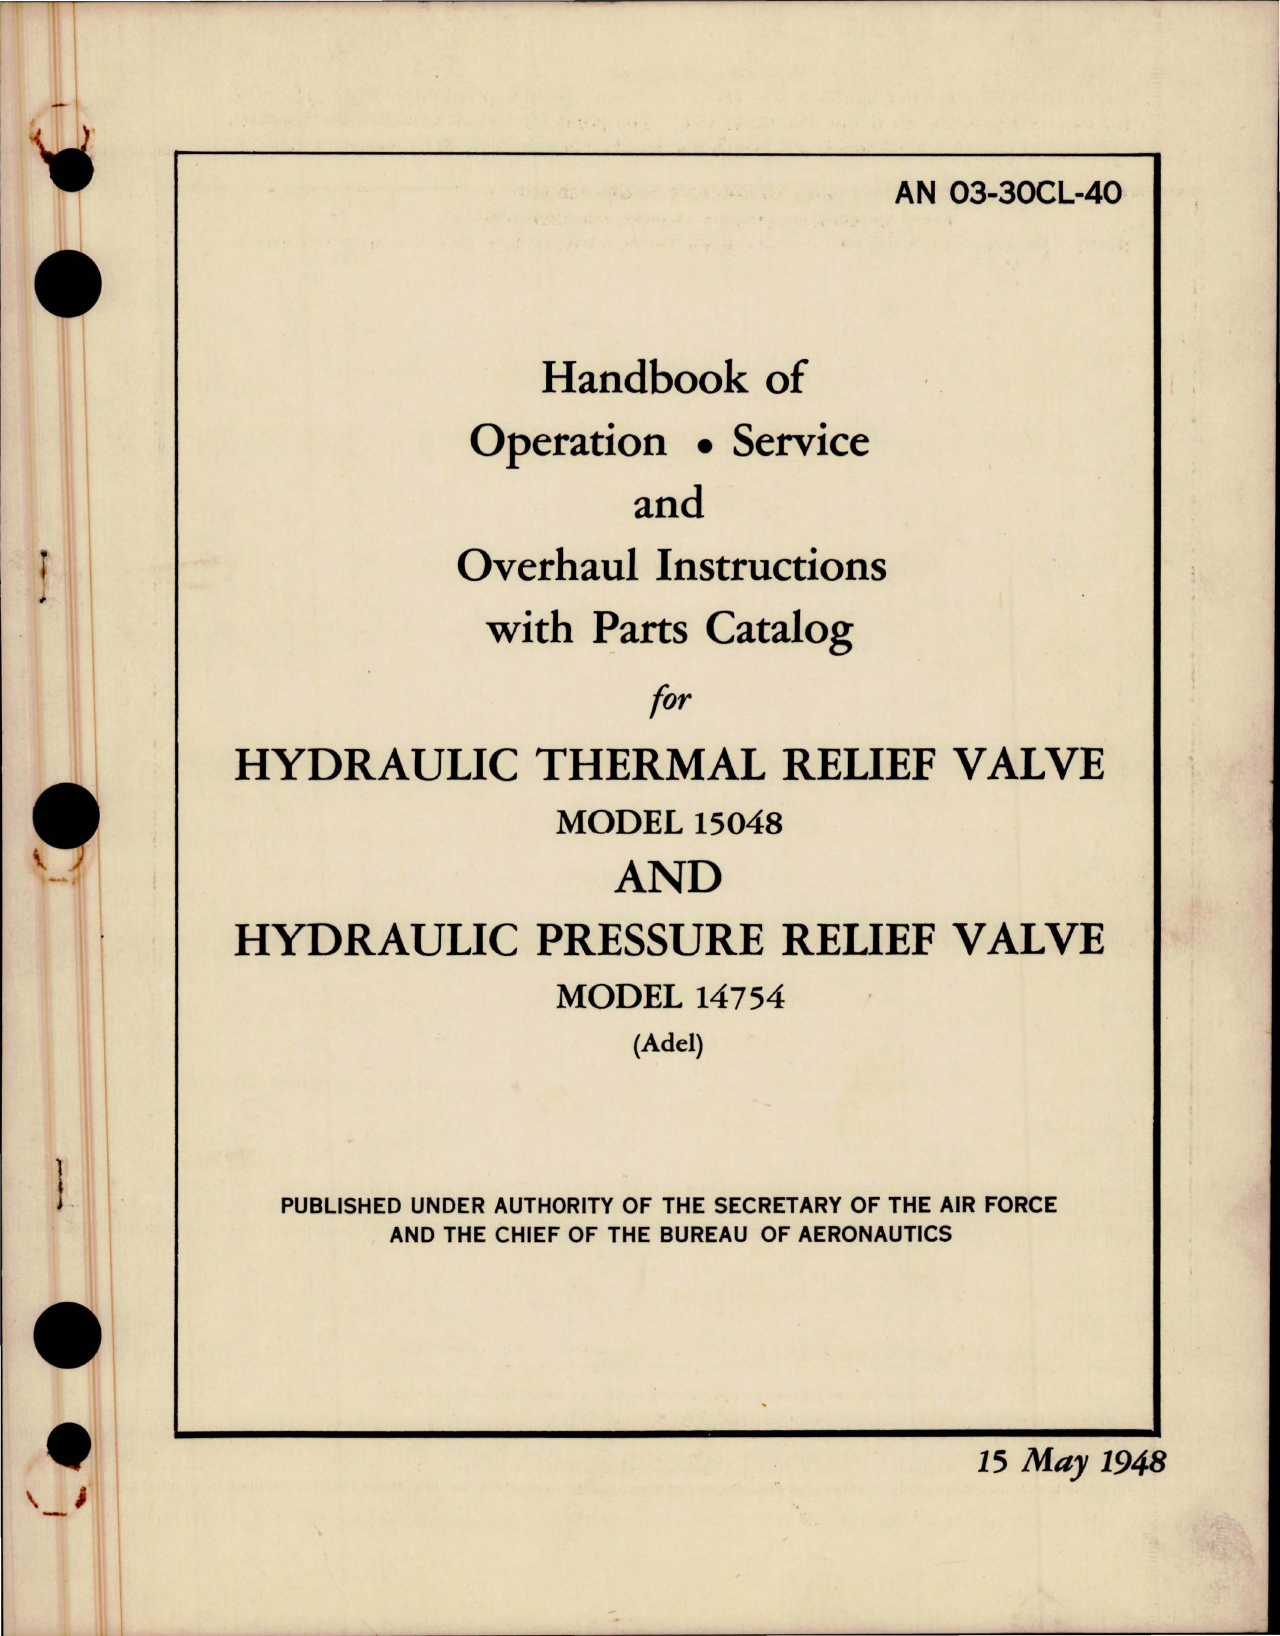 Sample page 1 from AirCorps Library document: Operation, Service, Overhaul Instructions with Parts Catalog for Hydraulic Thermal Relief Valve - 15048, and Hydraulic Pressure Relief Valve 14754